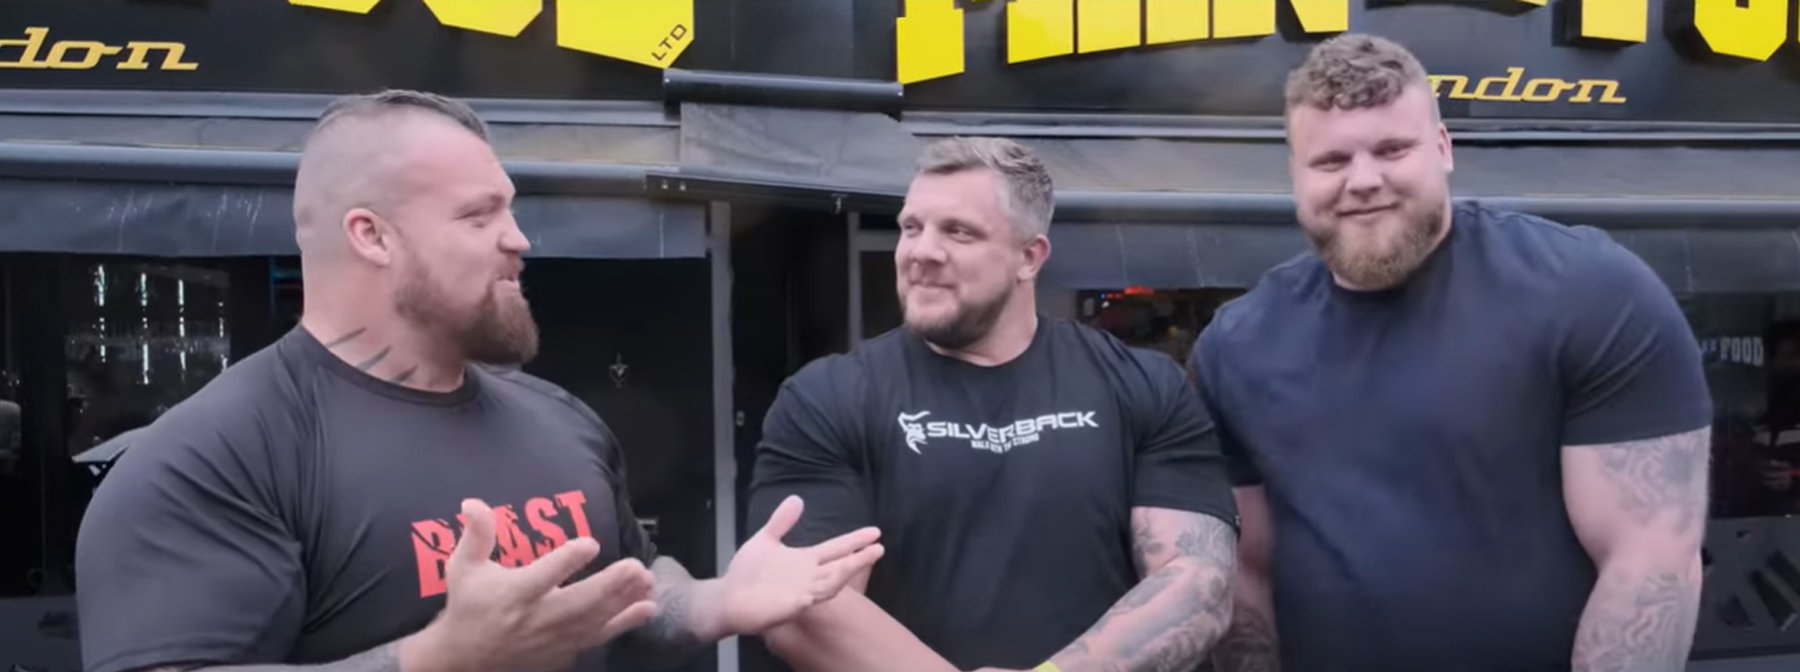 Strongmen Almost Sick From Intense Hot Wings Challenge